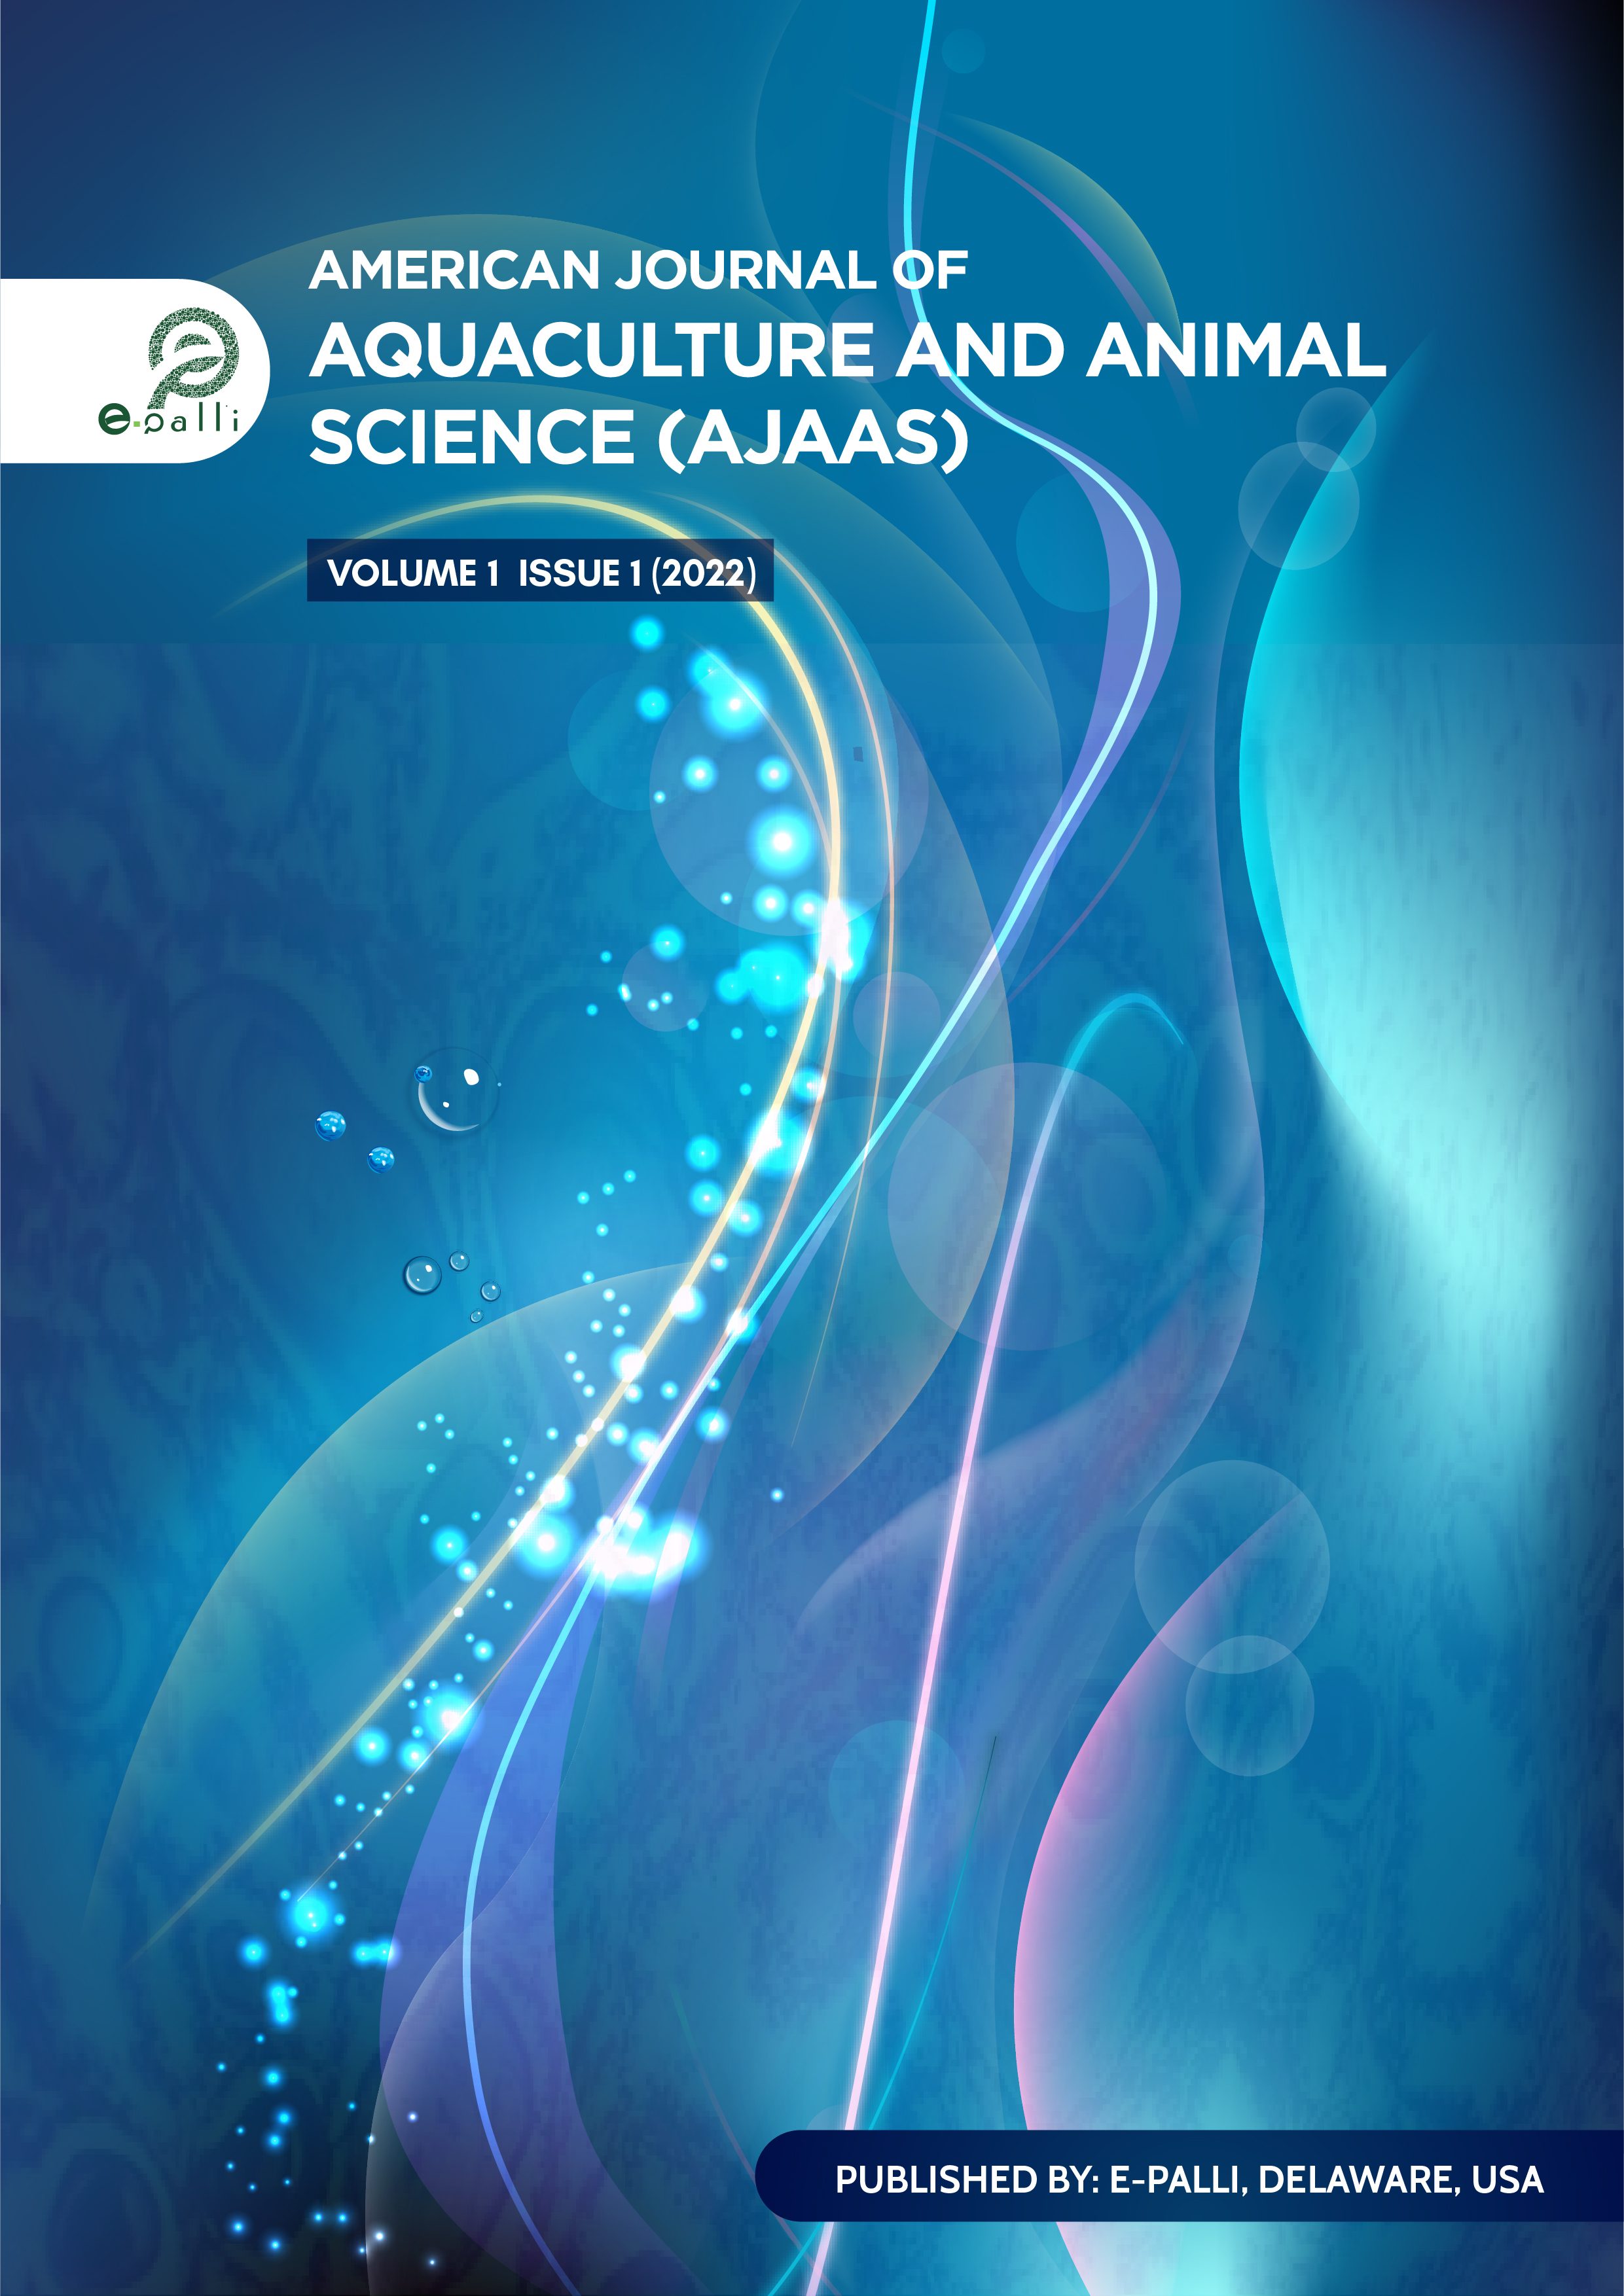 American Journal of Aquaculture and Animal Science